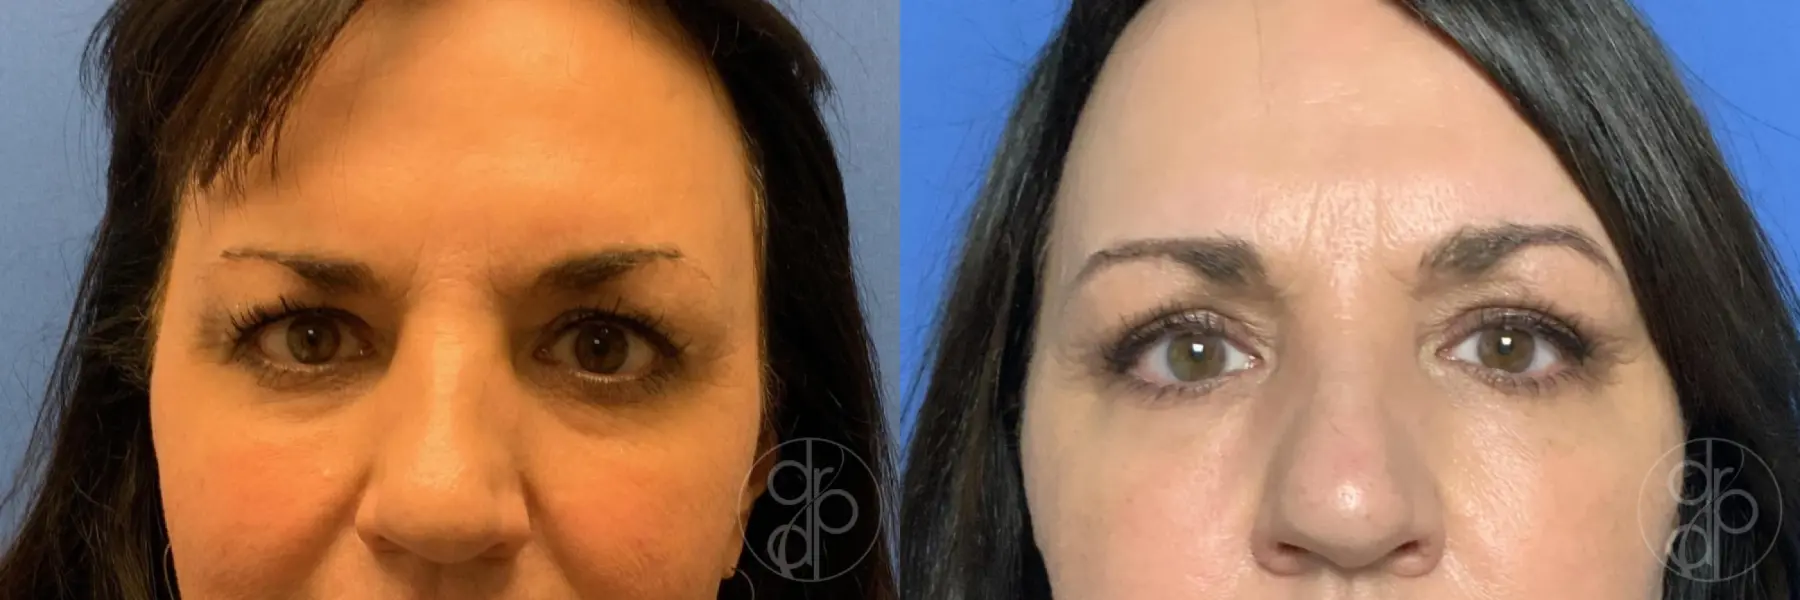 patient 10706 blepharoplasty before and after result - Before and After 1